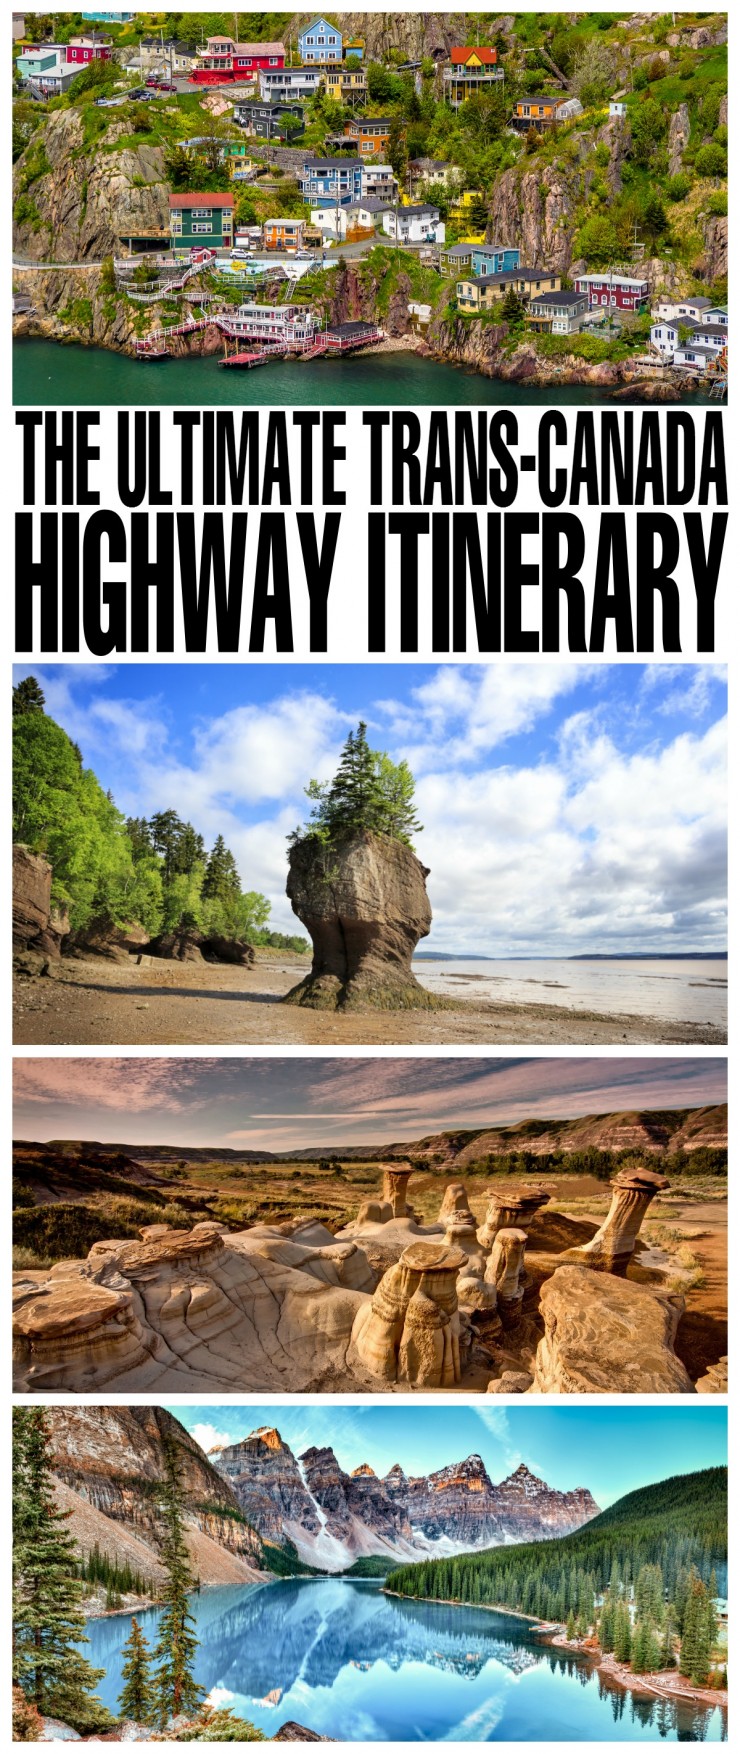 The Ultimate Trans-Canada Highway Itinerary